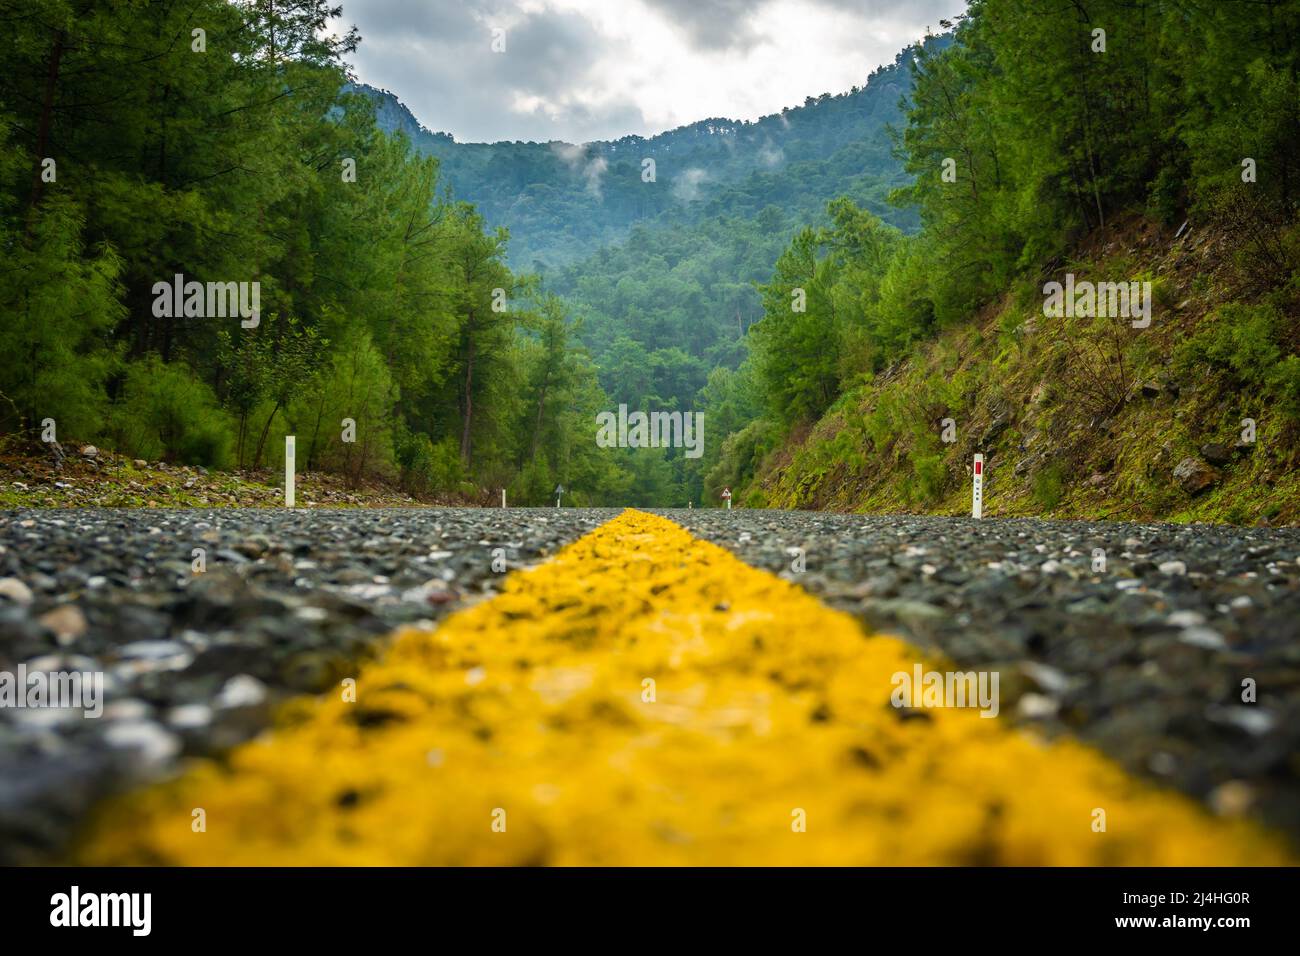 Amazing nature view from the asphalt road. Close up scene. Travel and transportation concept. Stock Photo